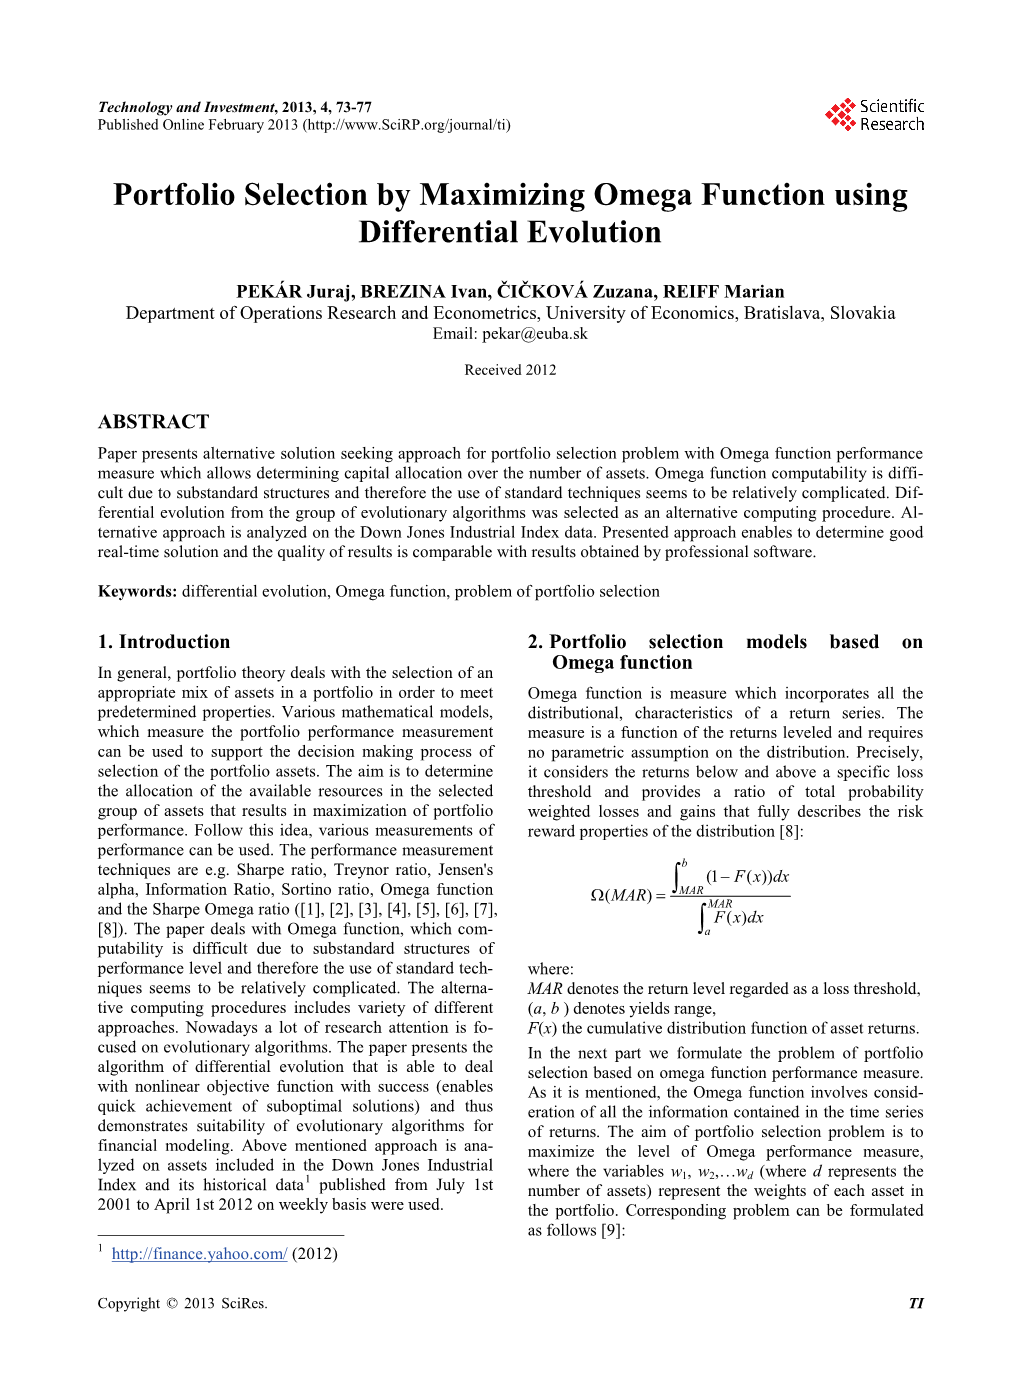 Portfolio Selection by Maximizing Omega Function Using Differential Evolution